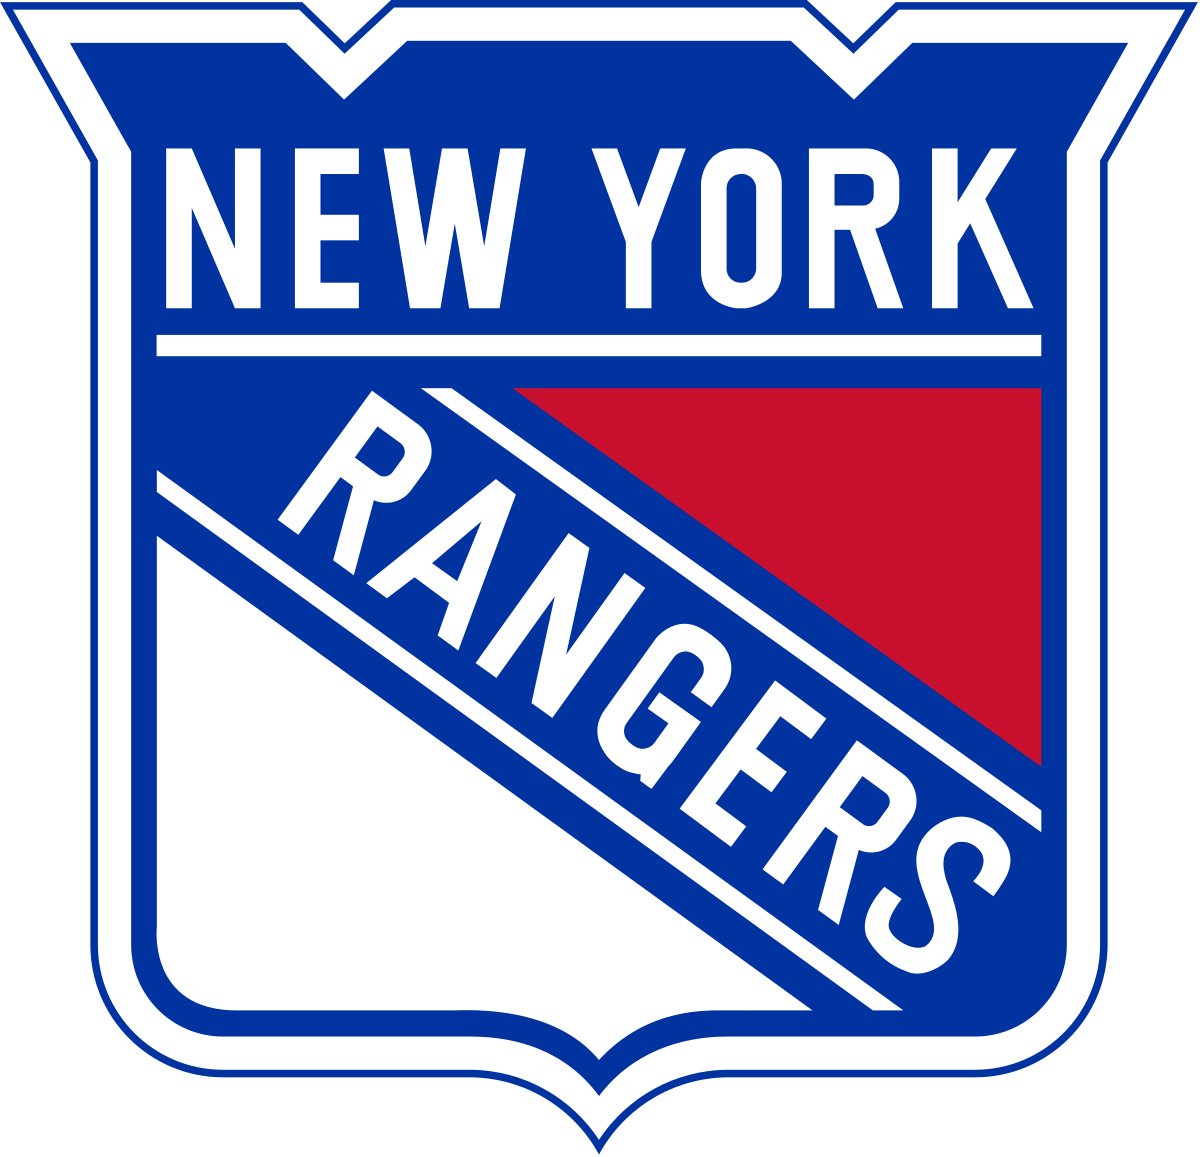 New York Rangers Colors - Team Color Codes